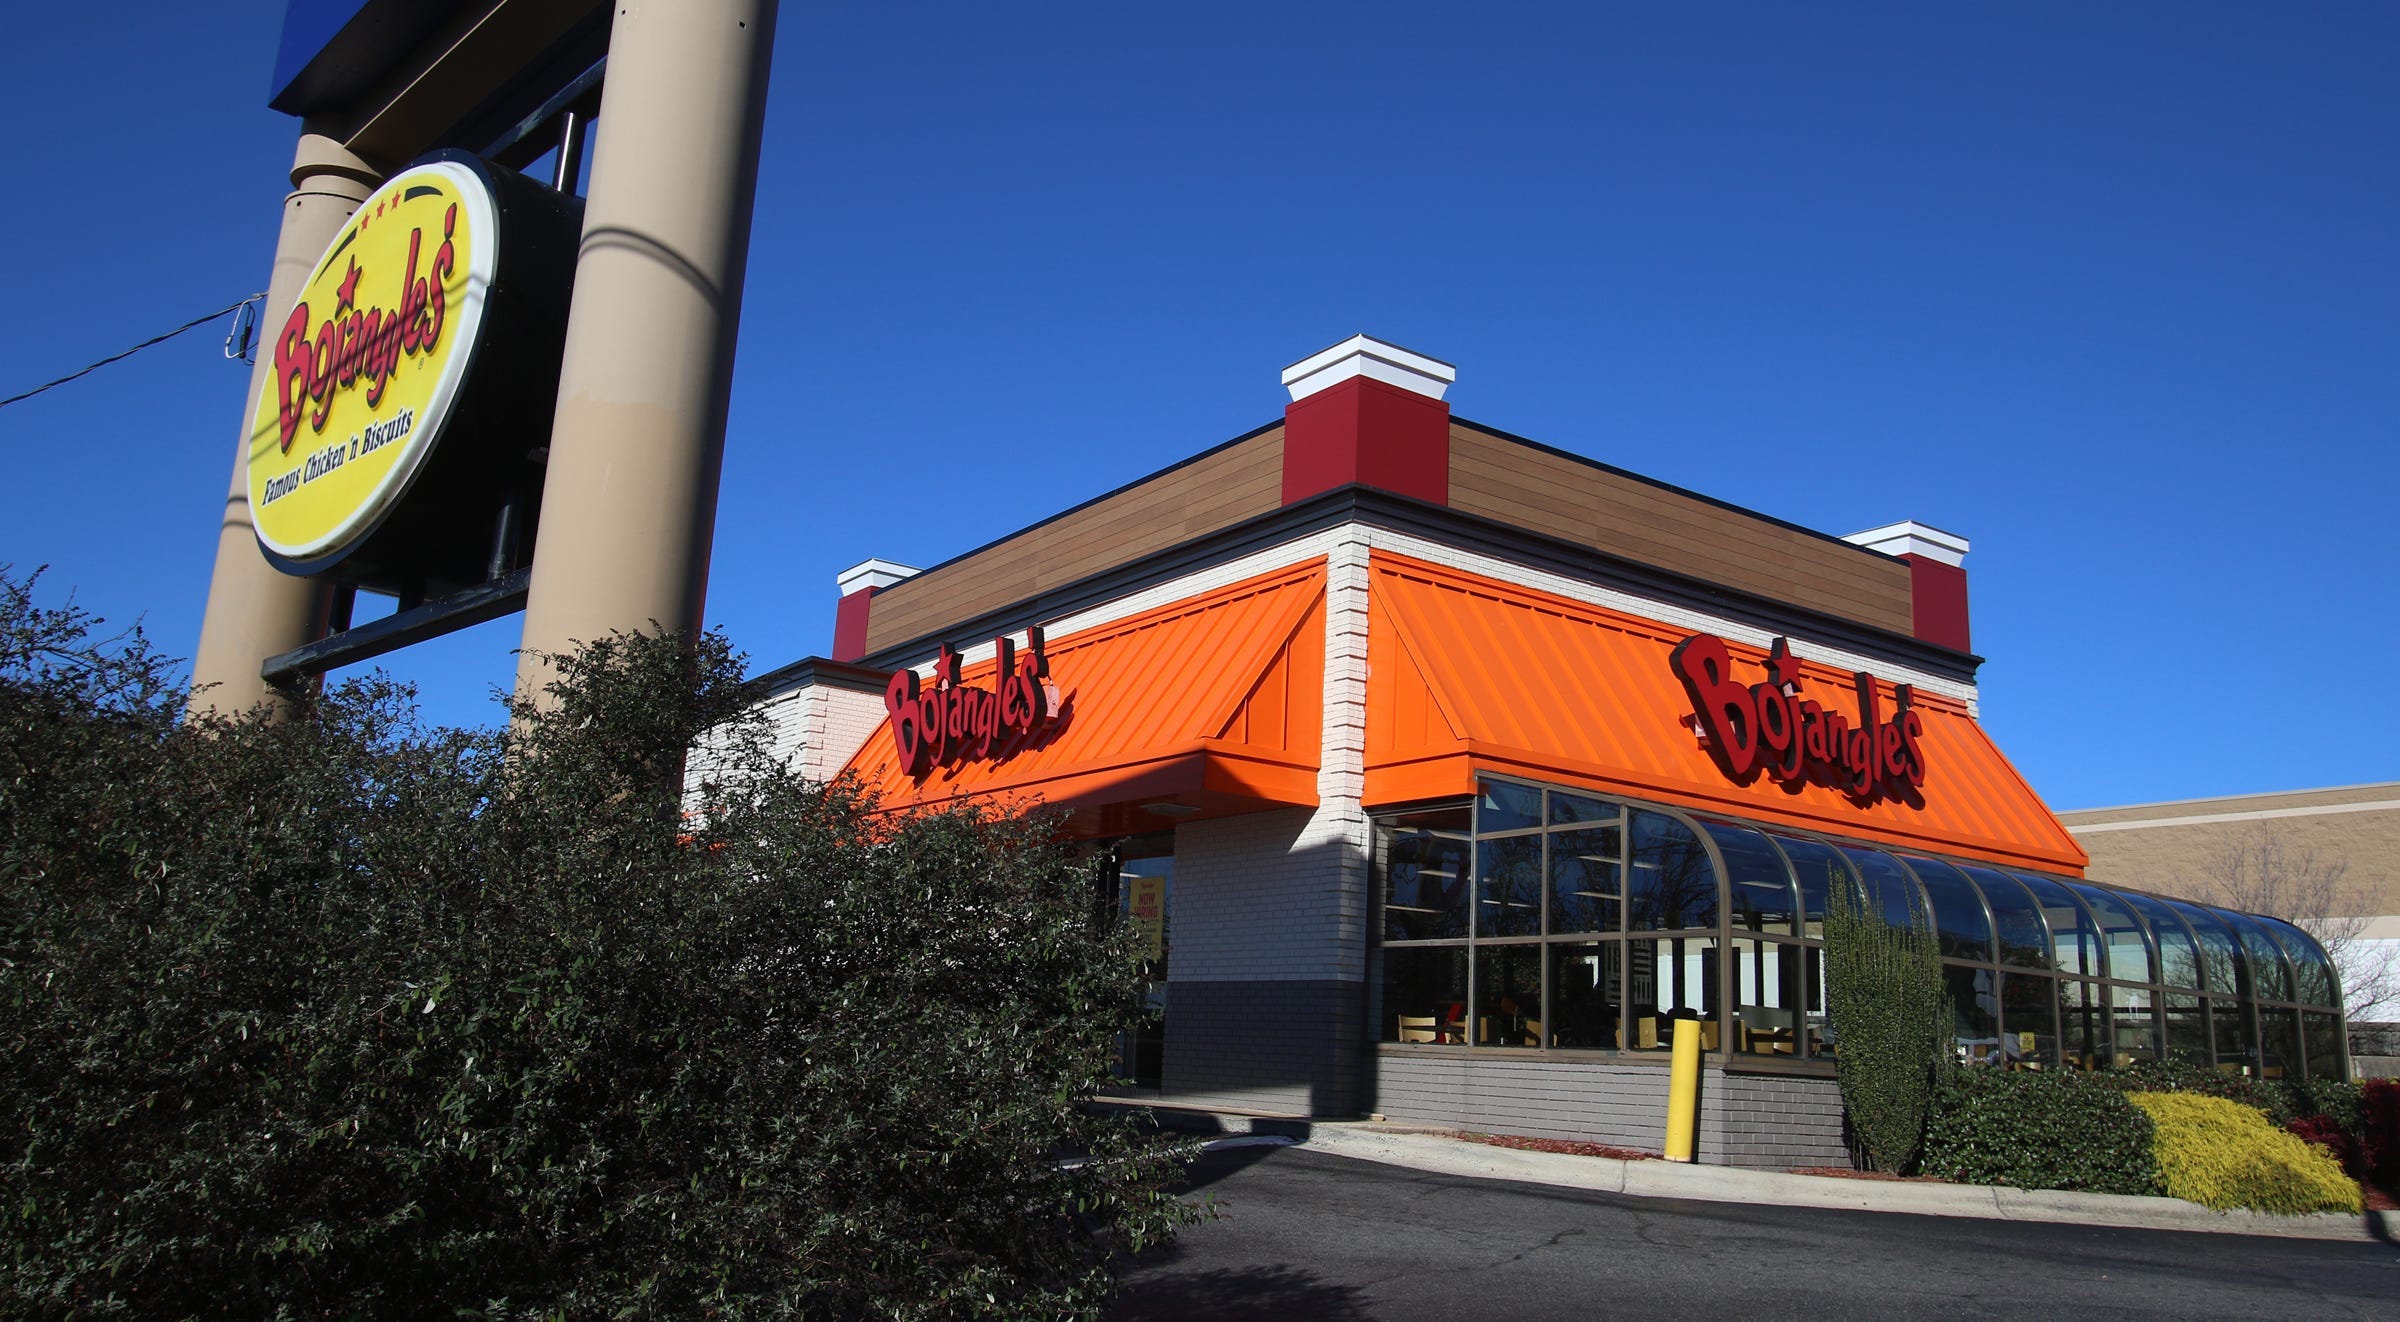 bojangles expands to california: first location set for la, many more potentially on the way